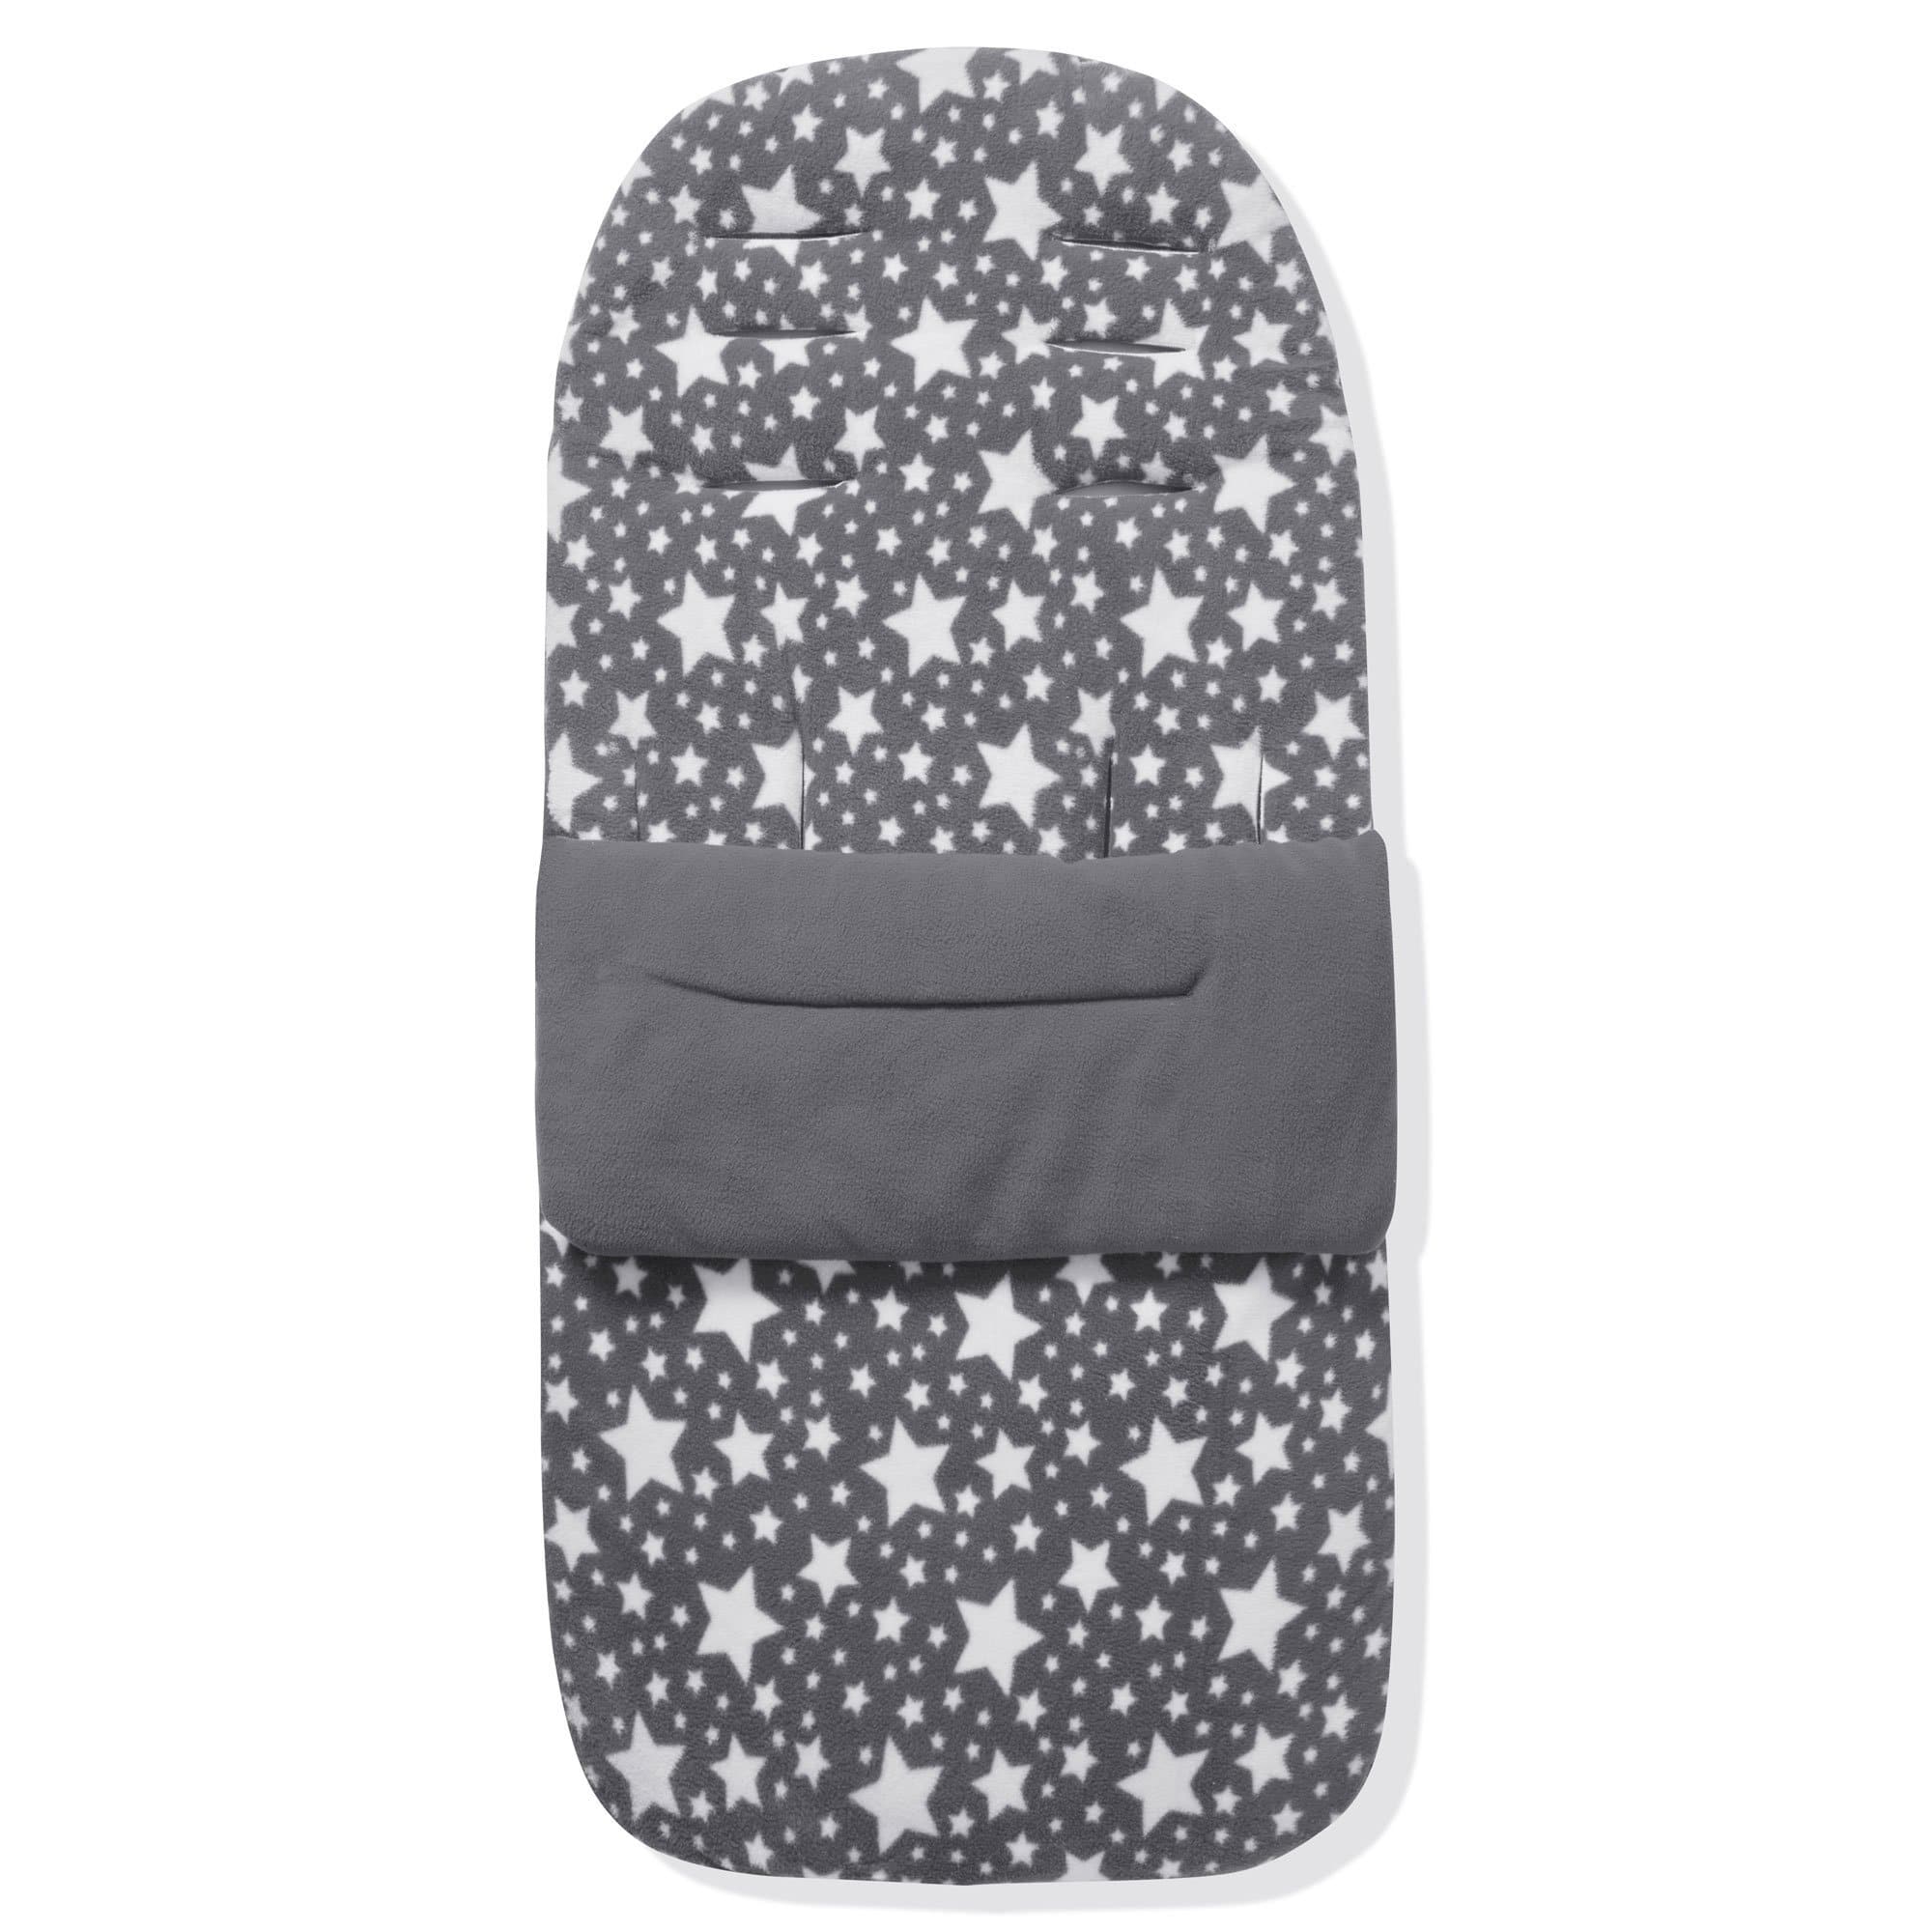 Fleece Footmuff / Cosy Toes Compatible with Hartan - Grey Star / Fits All Models | For Your Little One